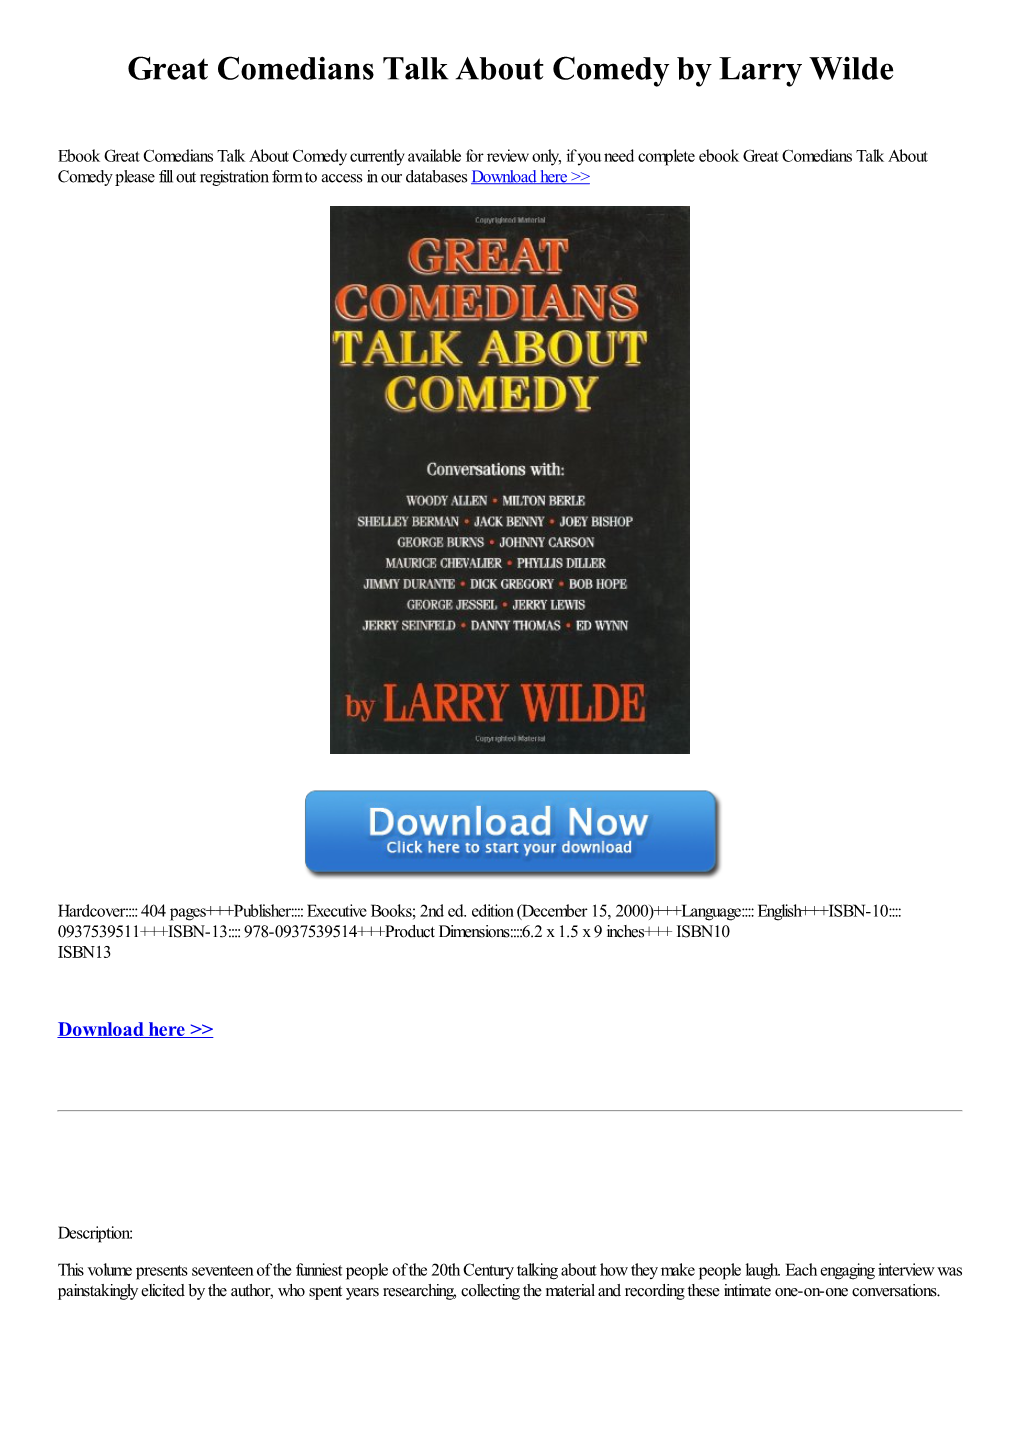 Great Comedians Talk About Comedy by Larry Wilde